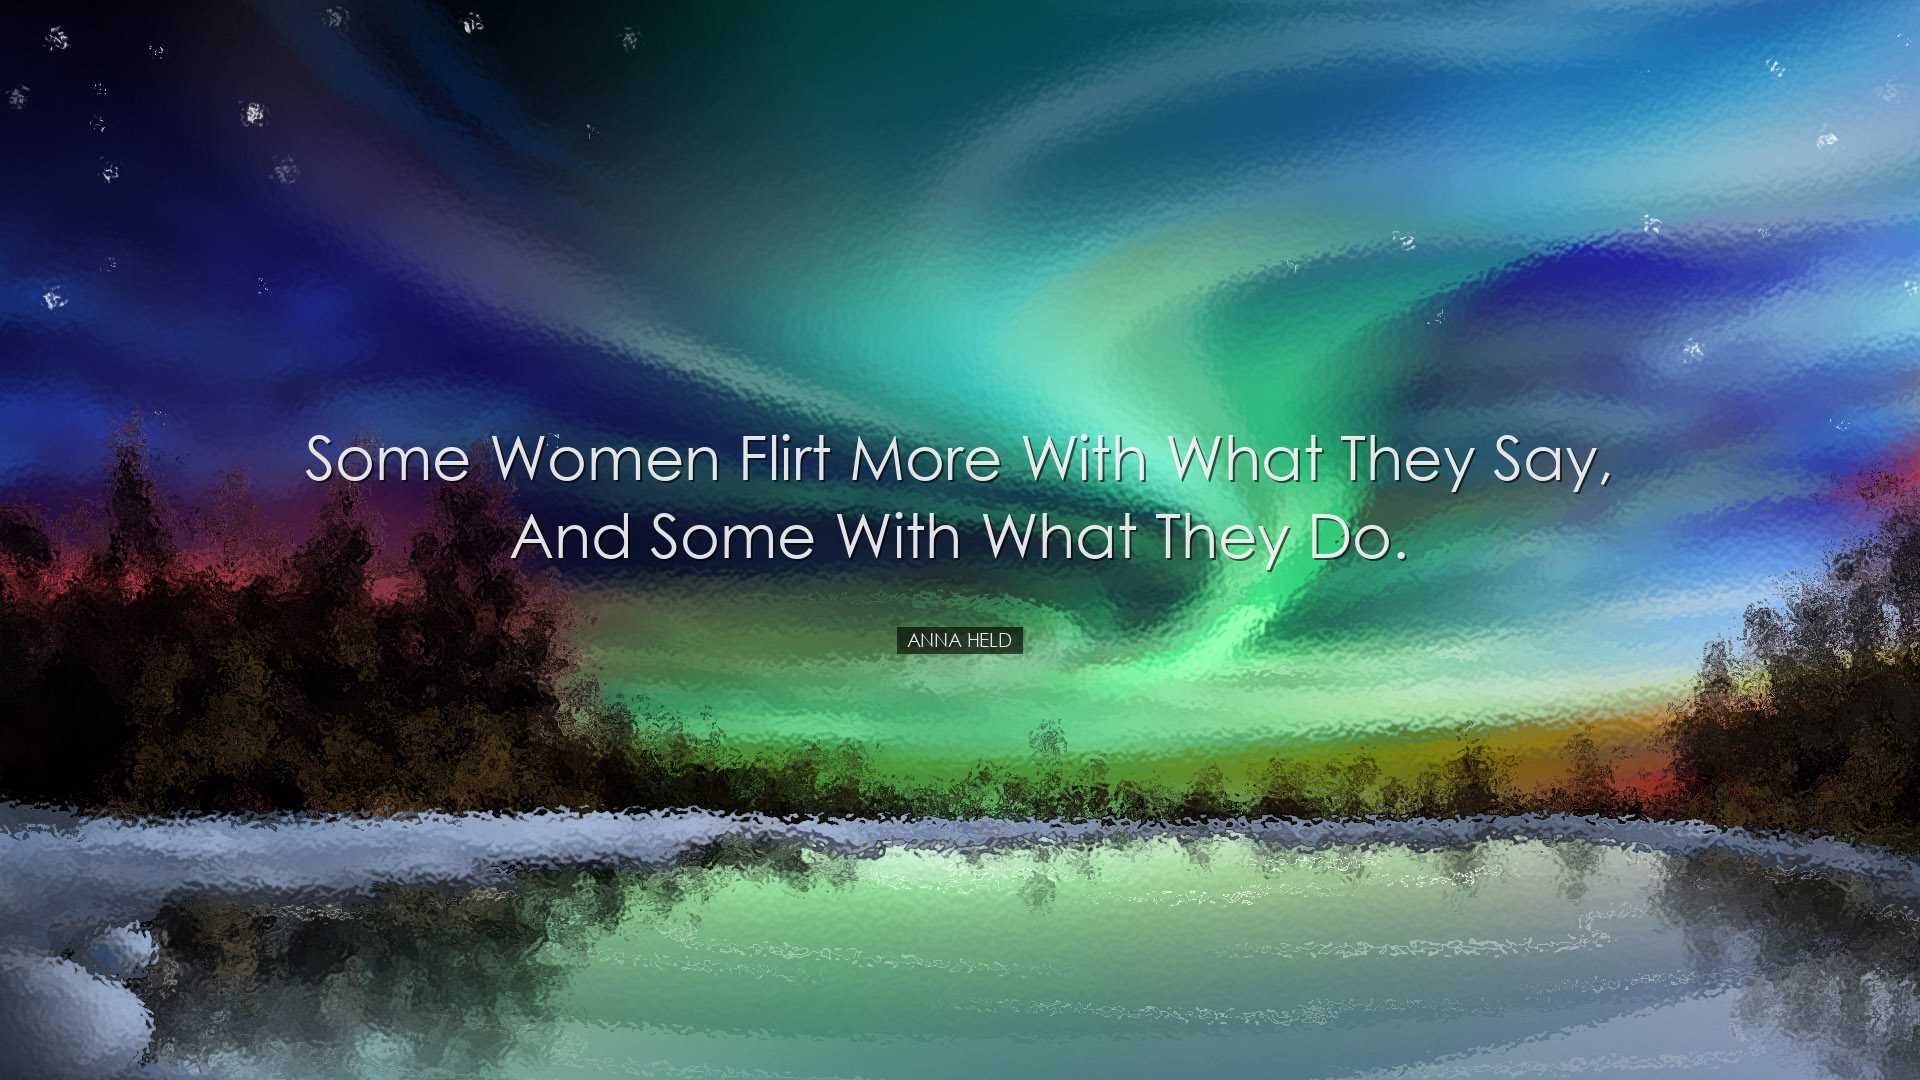 Some women flirt more with what they say, and some with what they